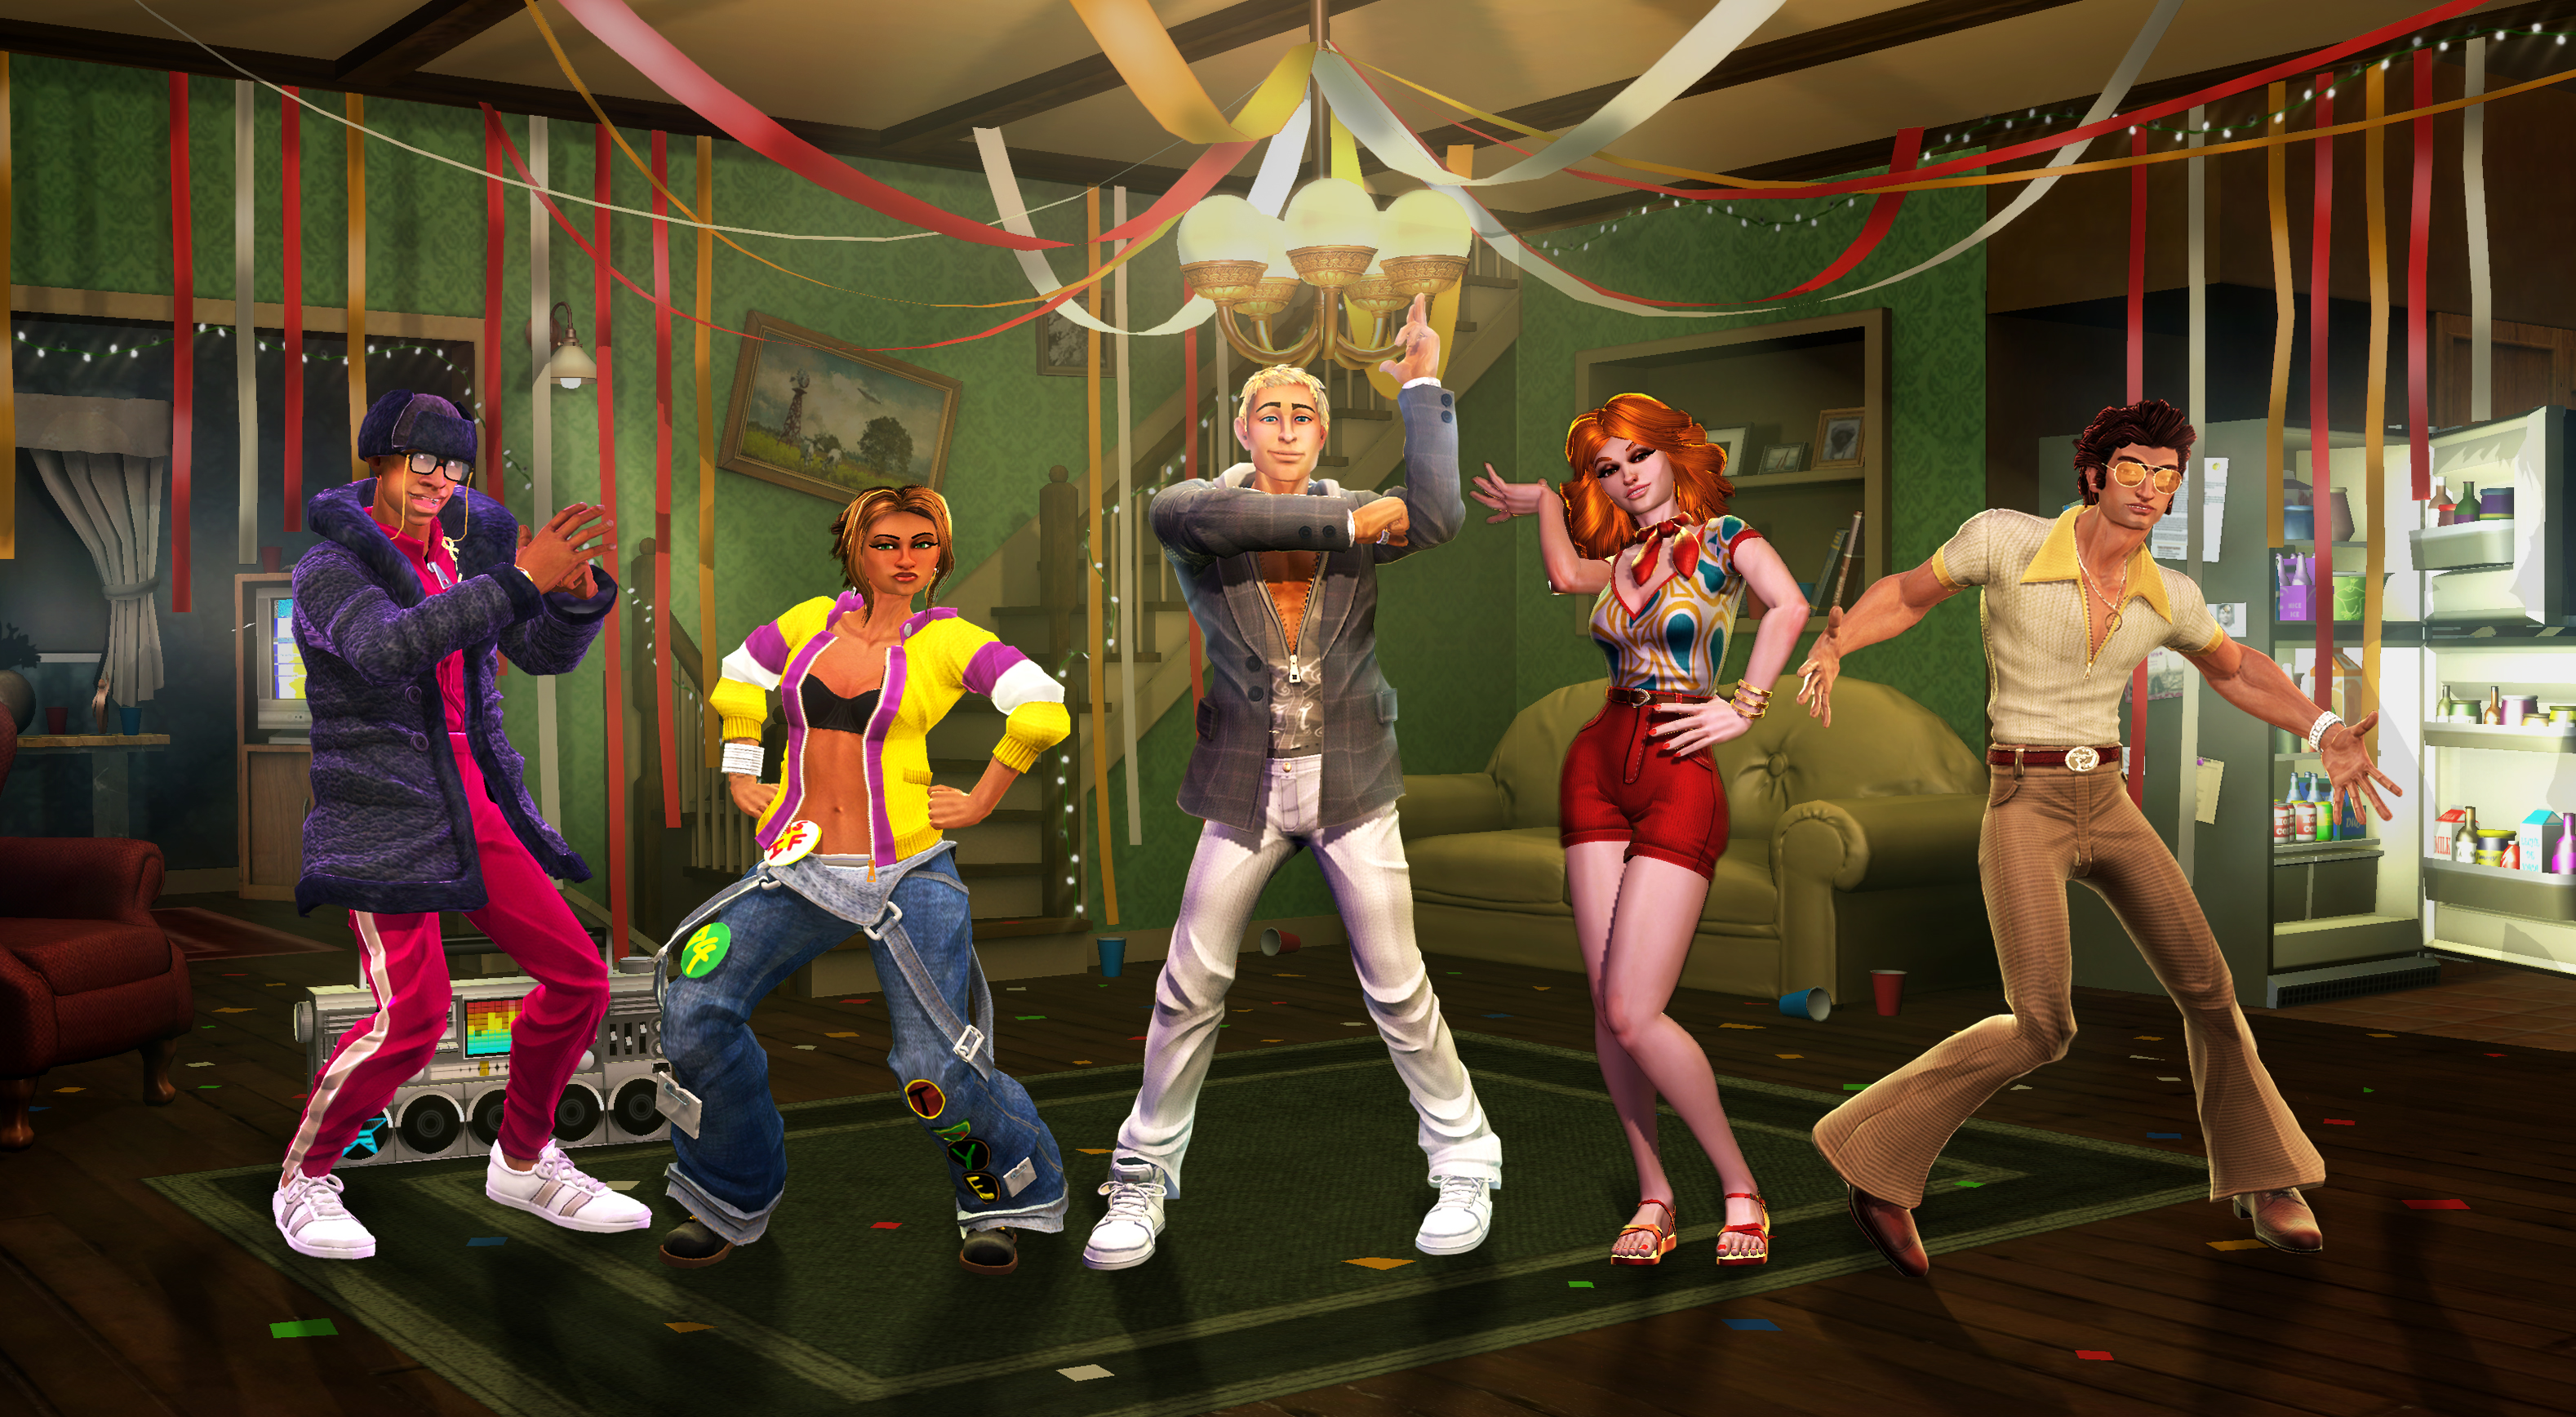 Permalink to Dance Central 3 models. 